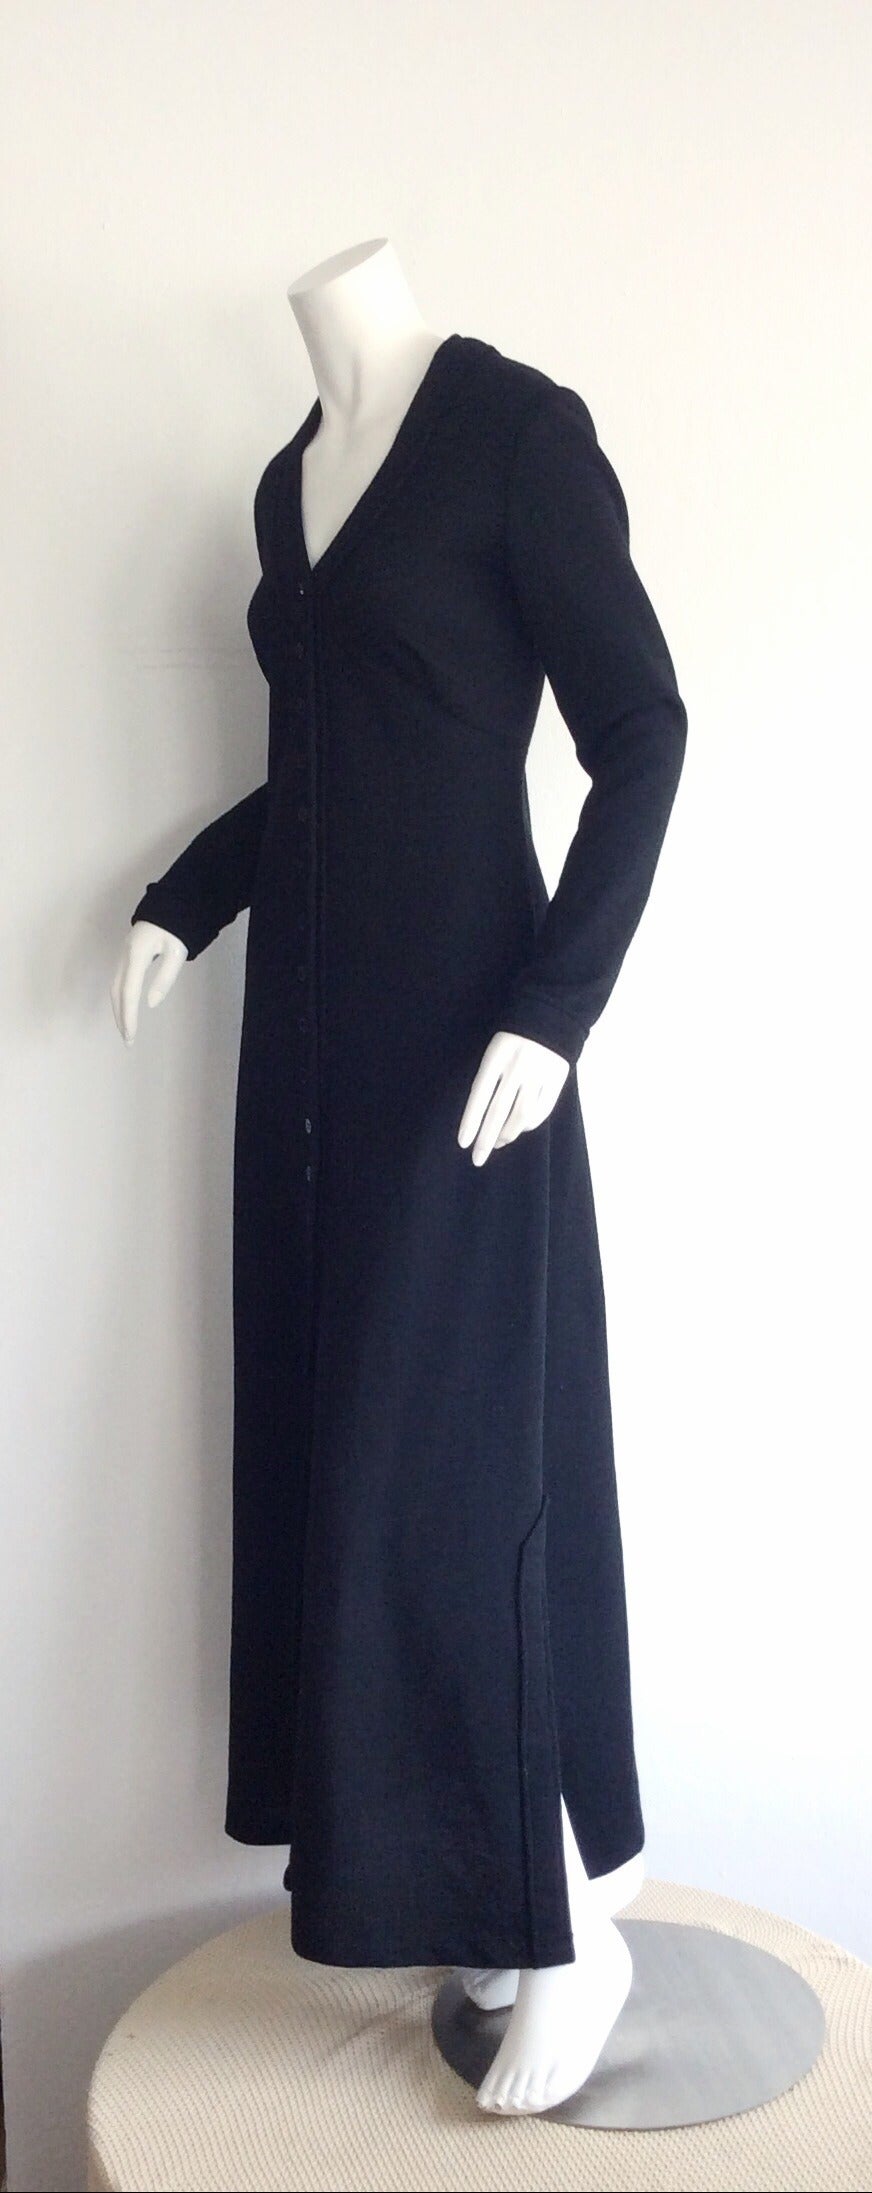 Incredible Vintage Mary Quant for Bonwit Teller Black Wool Shirt Dress 4